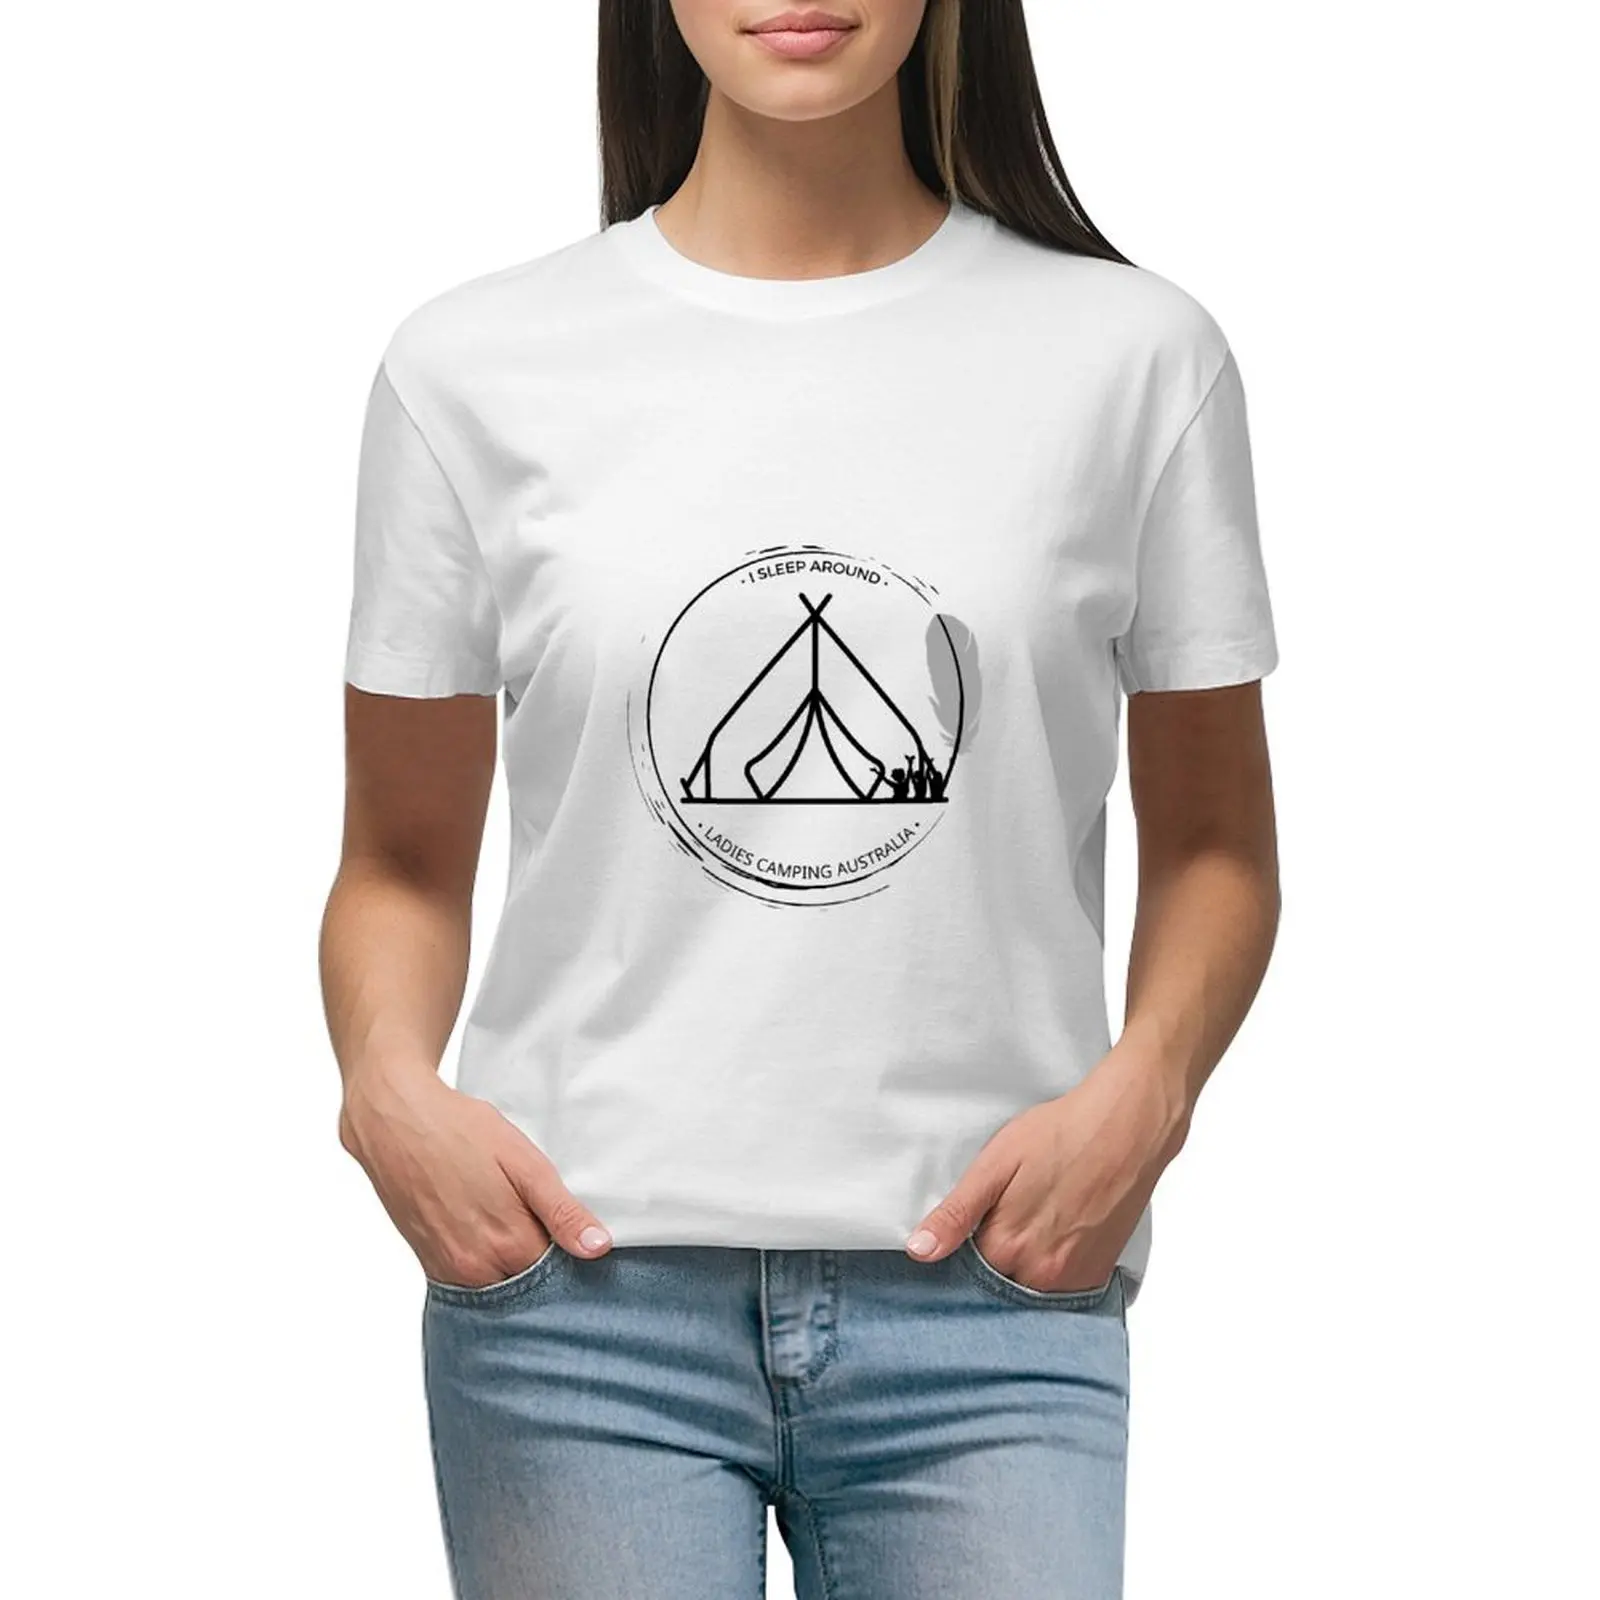 

International /Gypsy text Design-Ladies Camping Australia T-shirt cute clothes Blouse rock and roll t shirts for Women